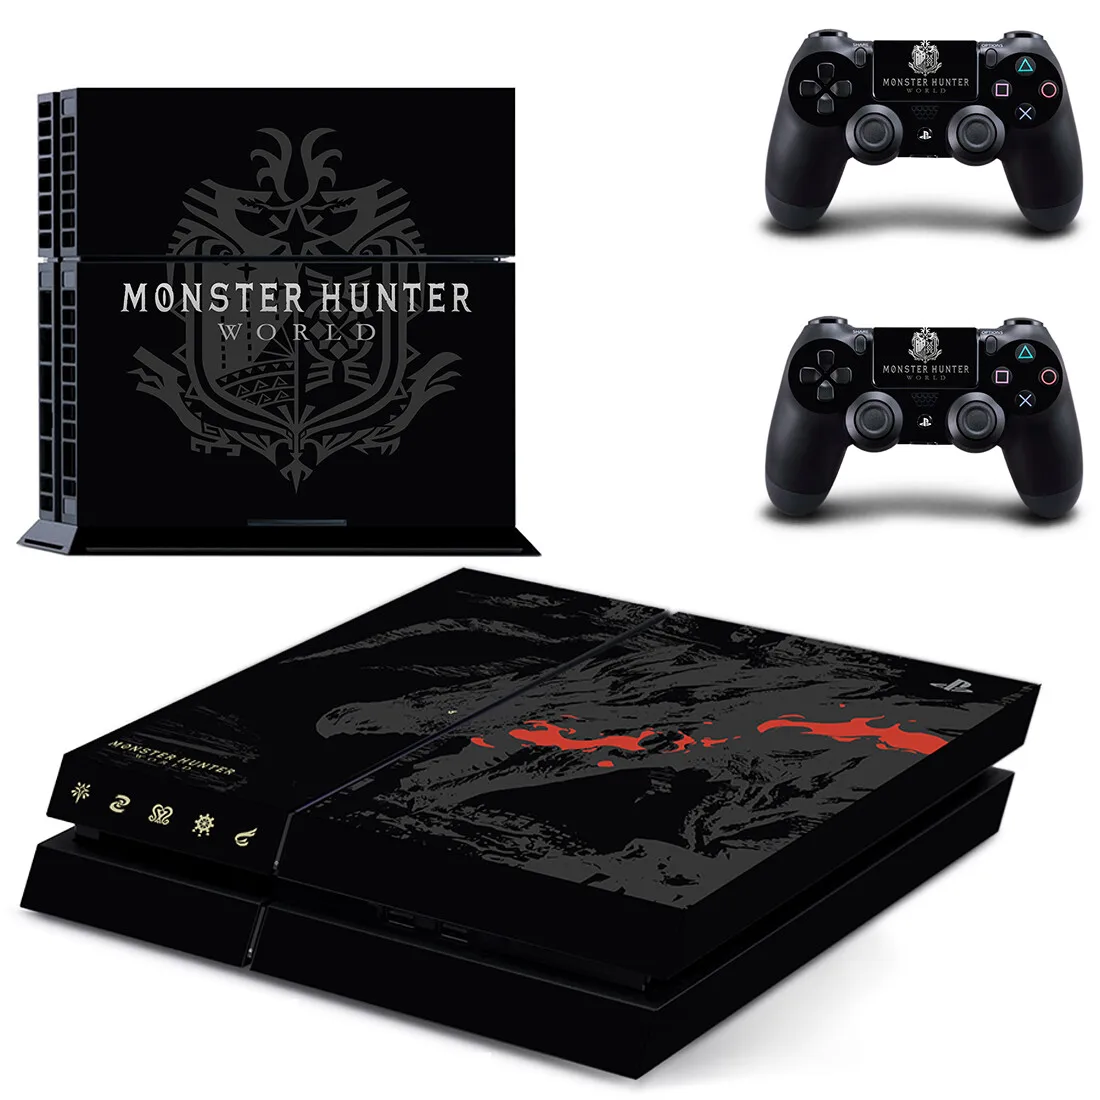 Monster Hunter PS4 Stickers Play station 4 Skin Sticker Decals Cover For PlayStation 4 PS4 Console & Controller Skins Vinyl